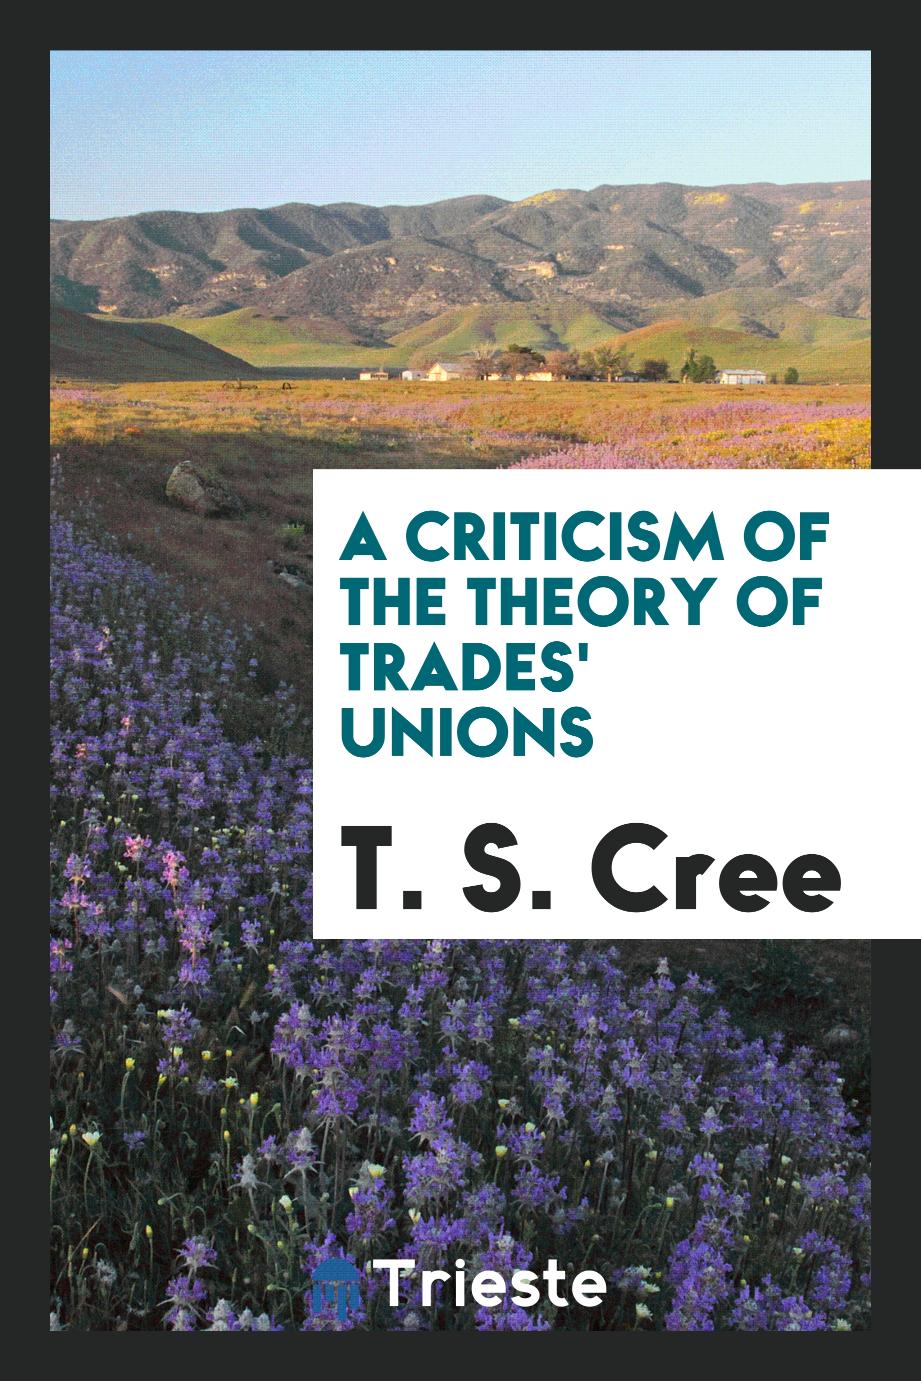 A criticism of the theory of trades' unions